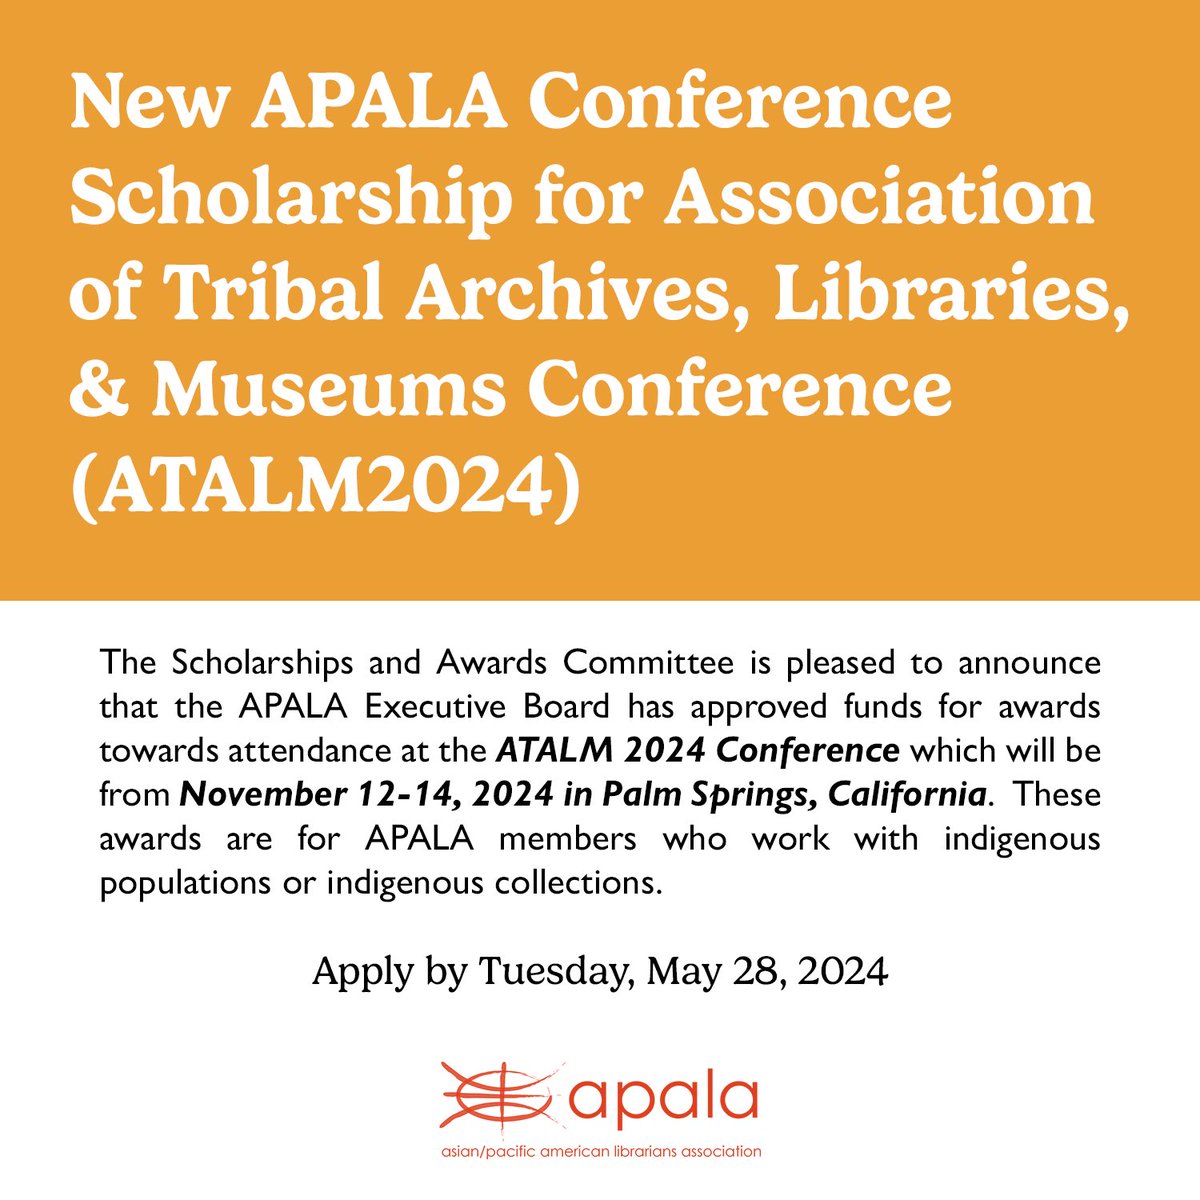 The APALA Scholarships & Awards Committee is pleased to announce new funding for awards towards attending @TribalALM ATALM 2024 Conference, November 12-14, in Palm Springs, California! Applications are due Tuesday, May 28, 2024.   Learn more & apply: apalaweb.org/new-apala-conf…